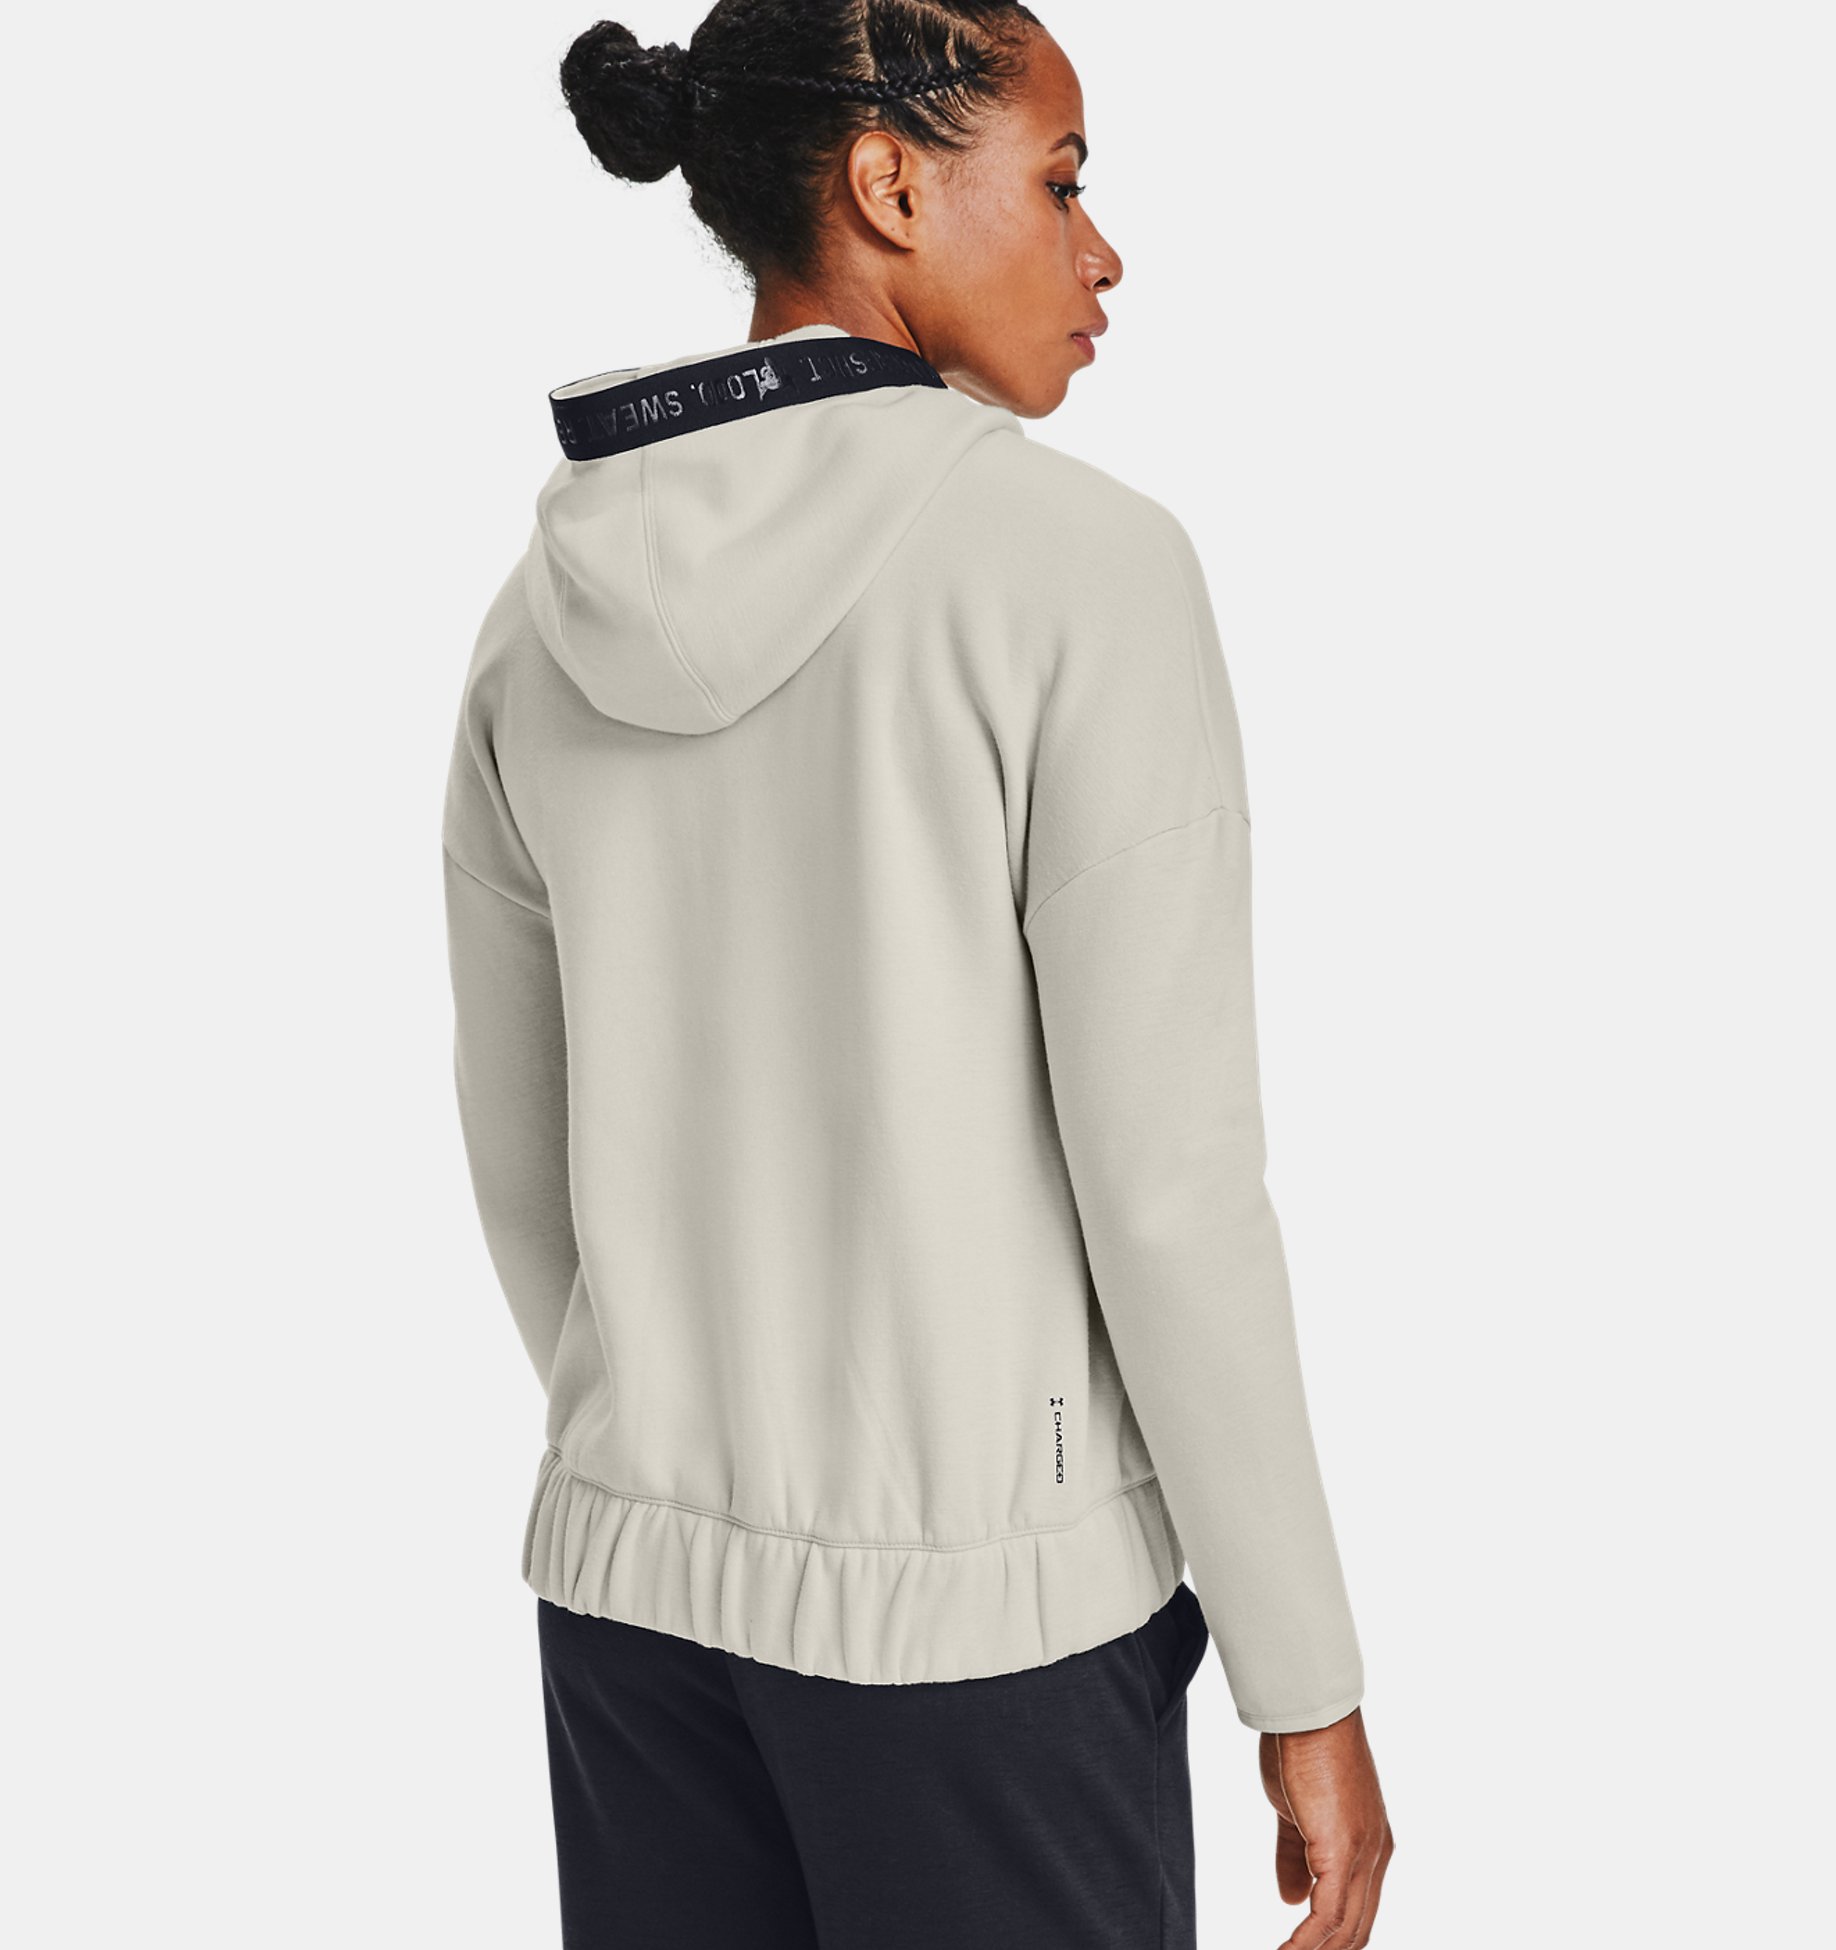 Women's Project Rock Charged Cotton® Fleece Full Zip | Under Armour